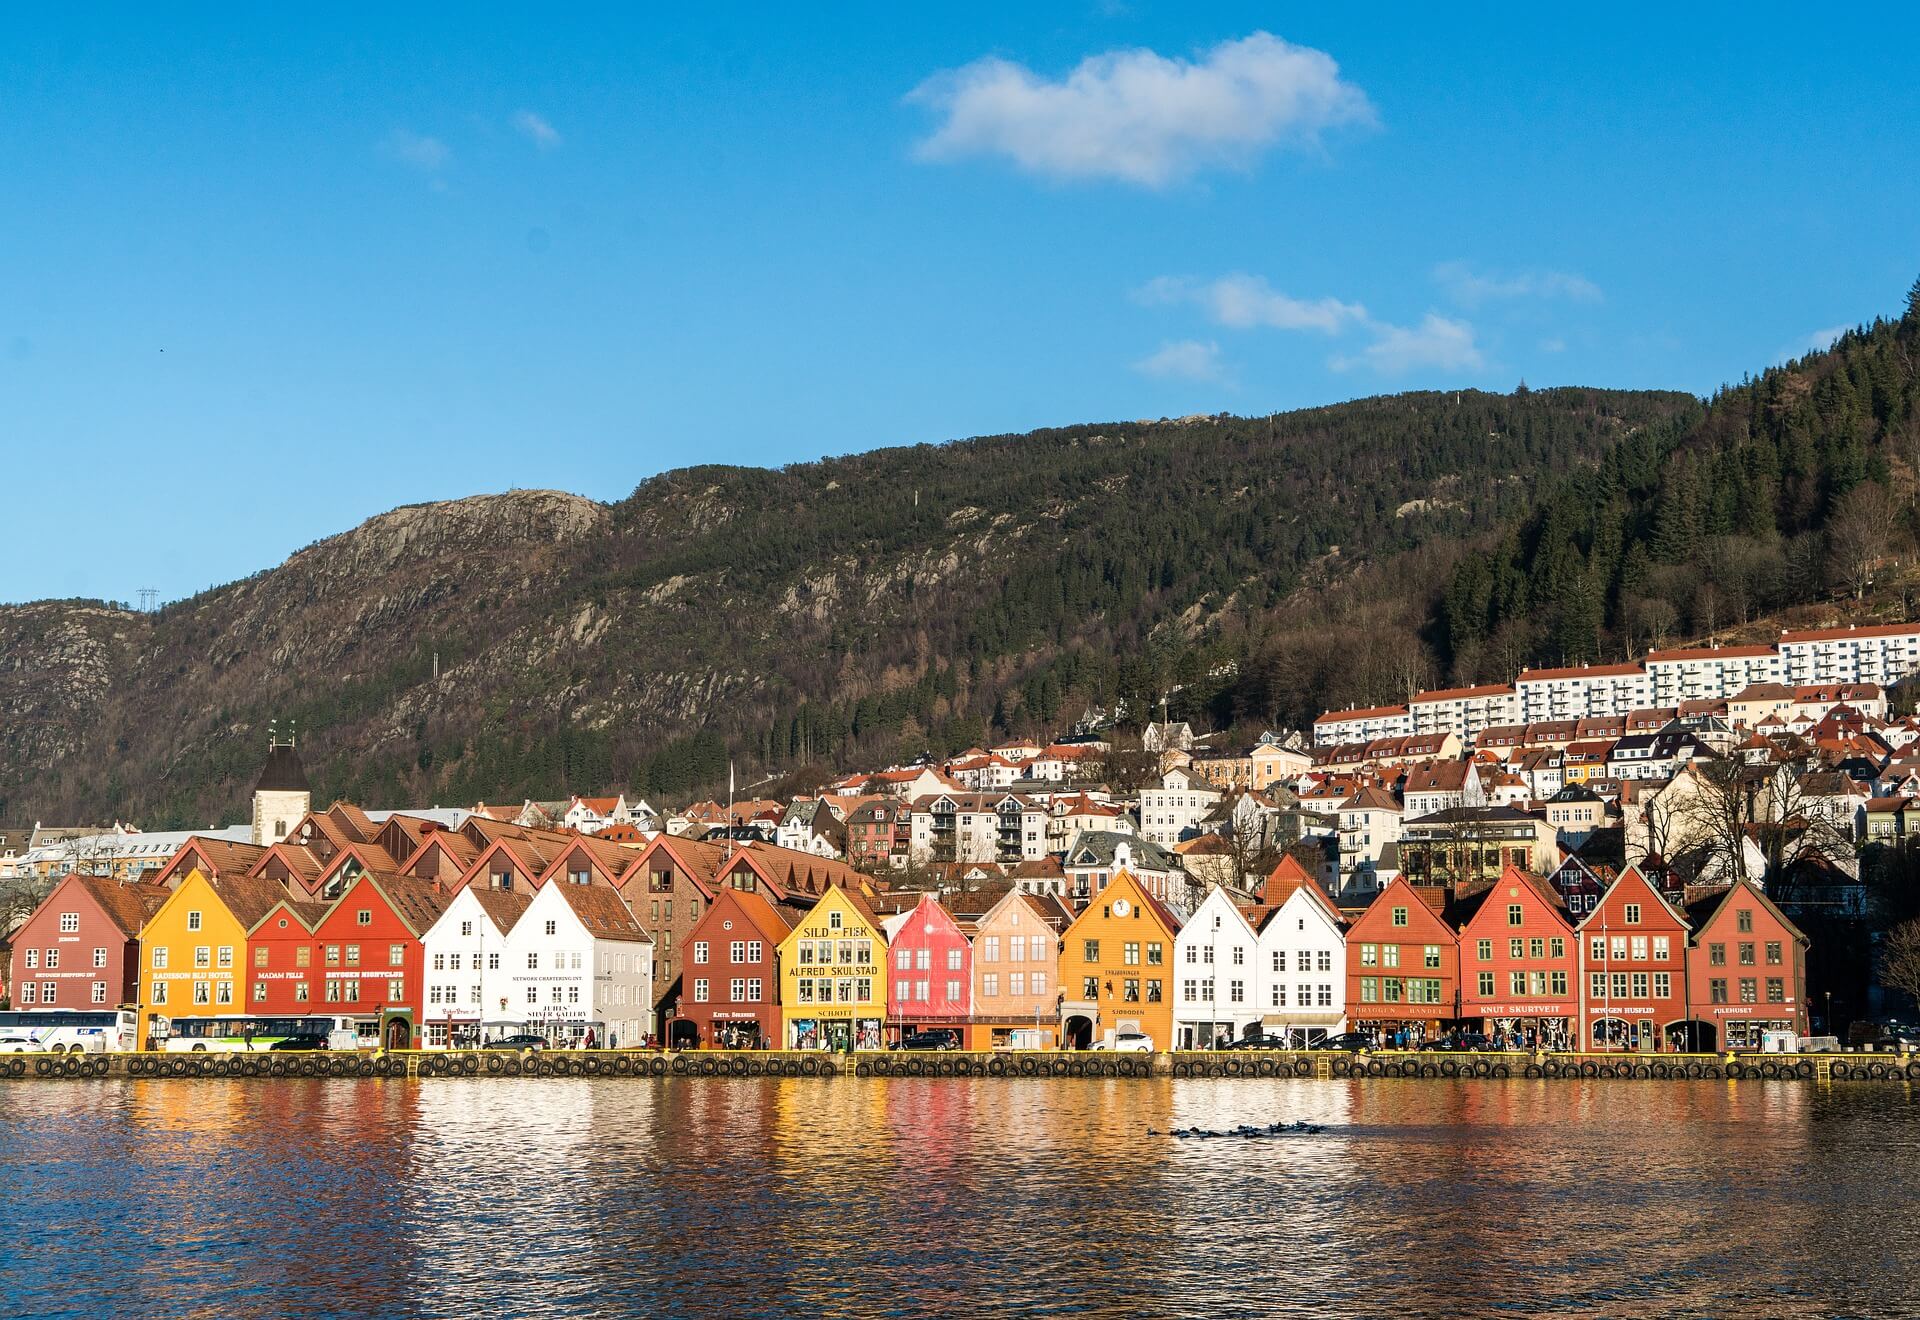 14 Gorgeous European Towns You (Probably) Haven't Heard Of